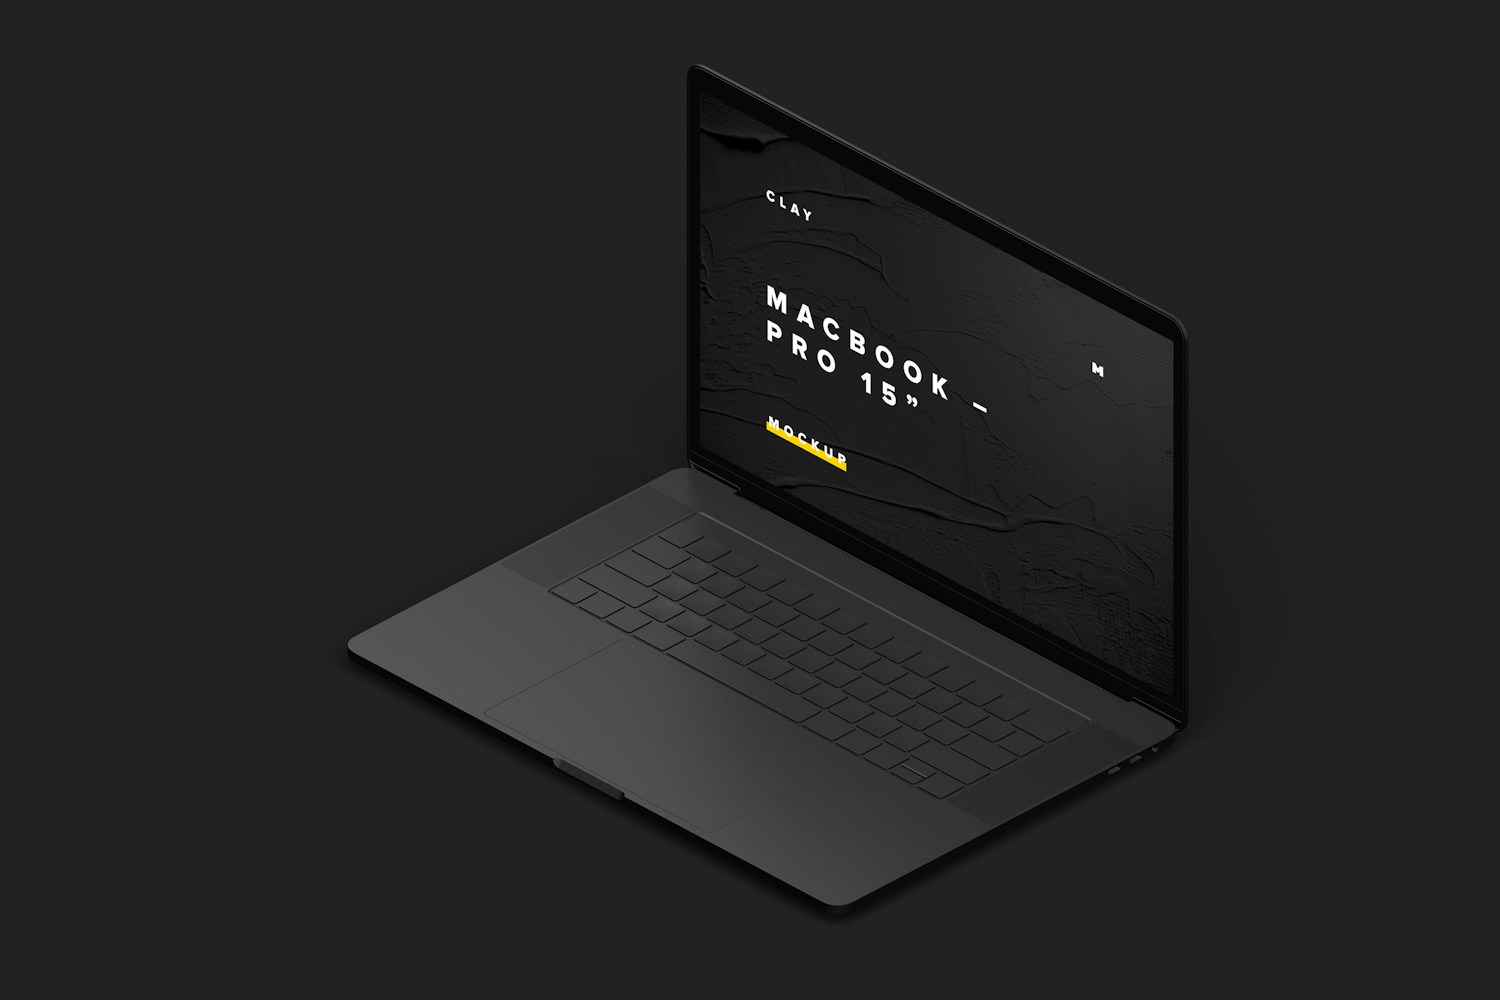 Clay MacBook Pro 15" with Touch Bar, Right Isometric View Mockup